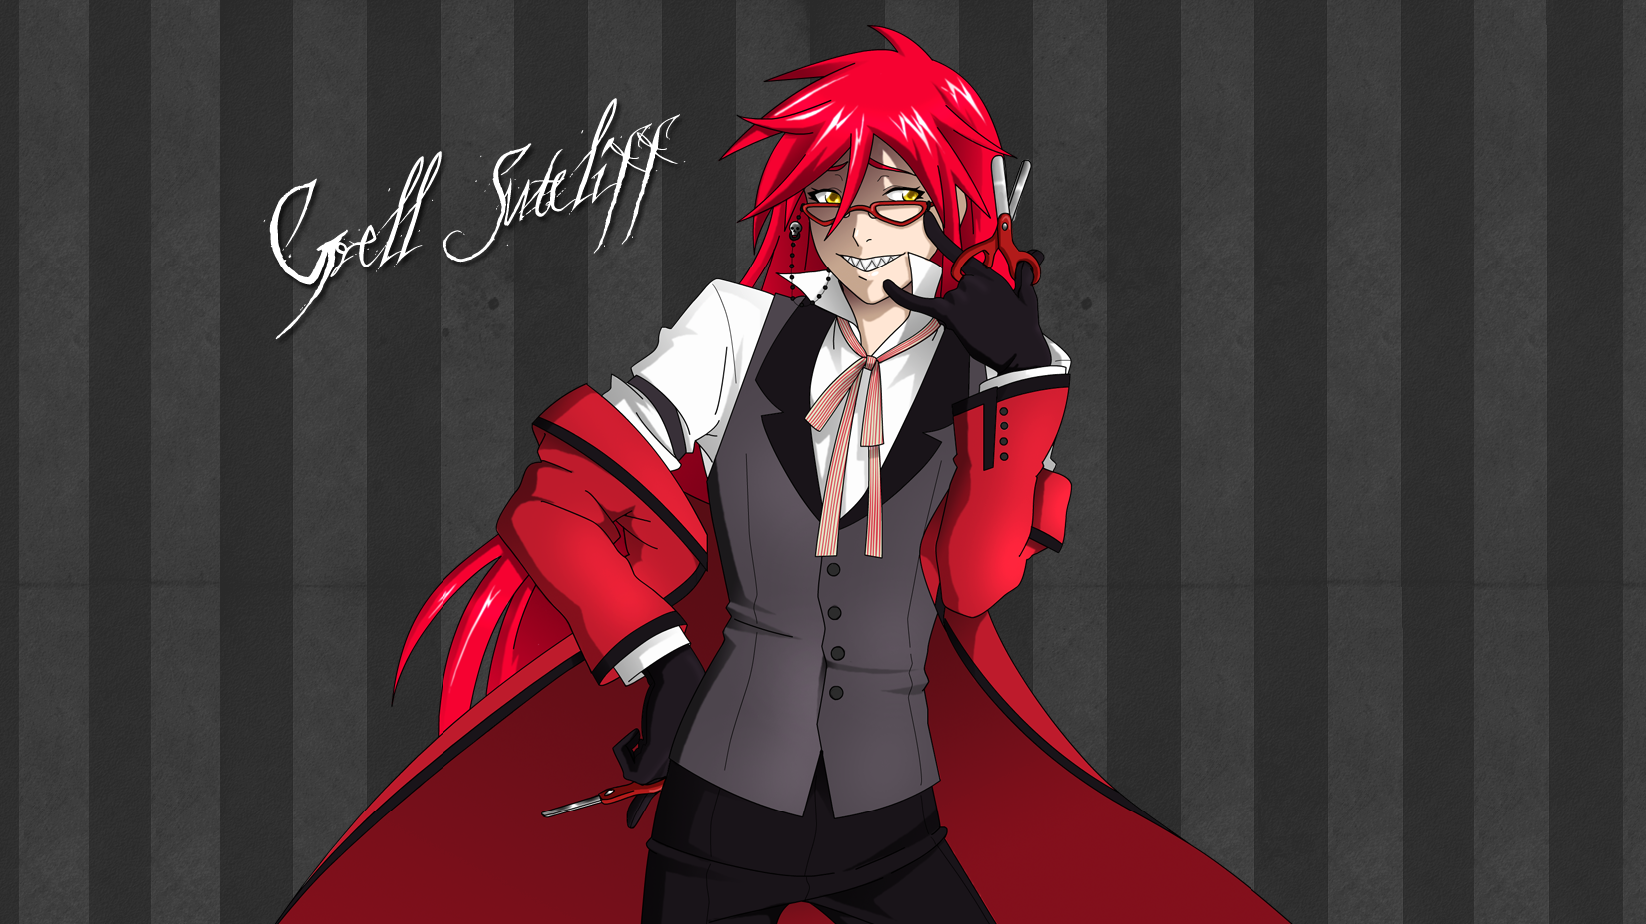 Grell is cute!!